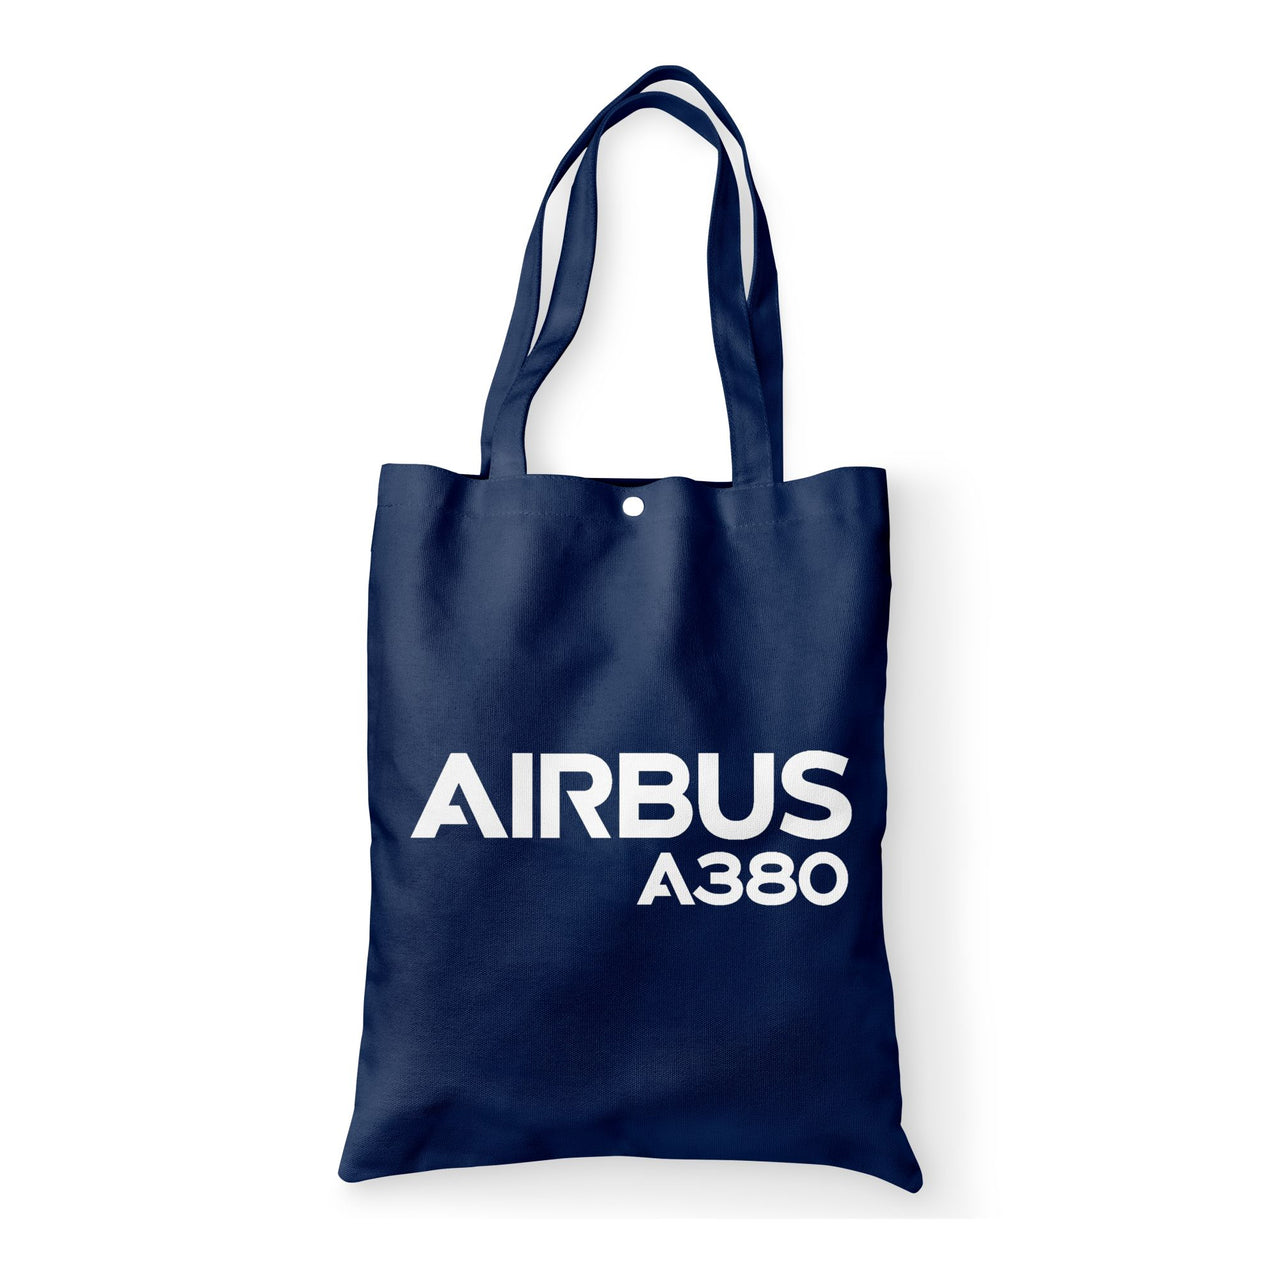 Airbus A380 & Text Designed Tote Bags